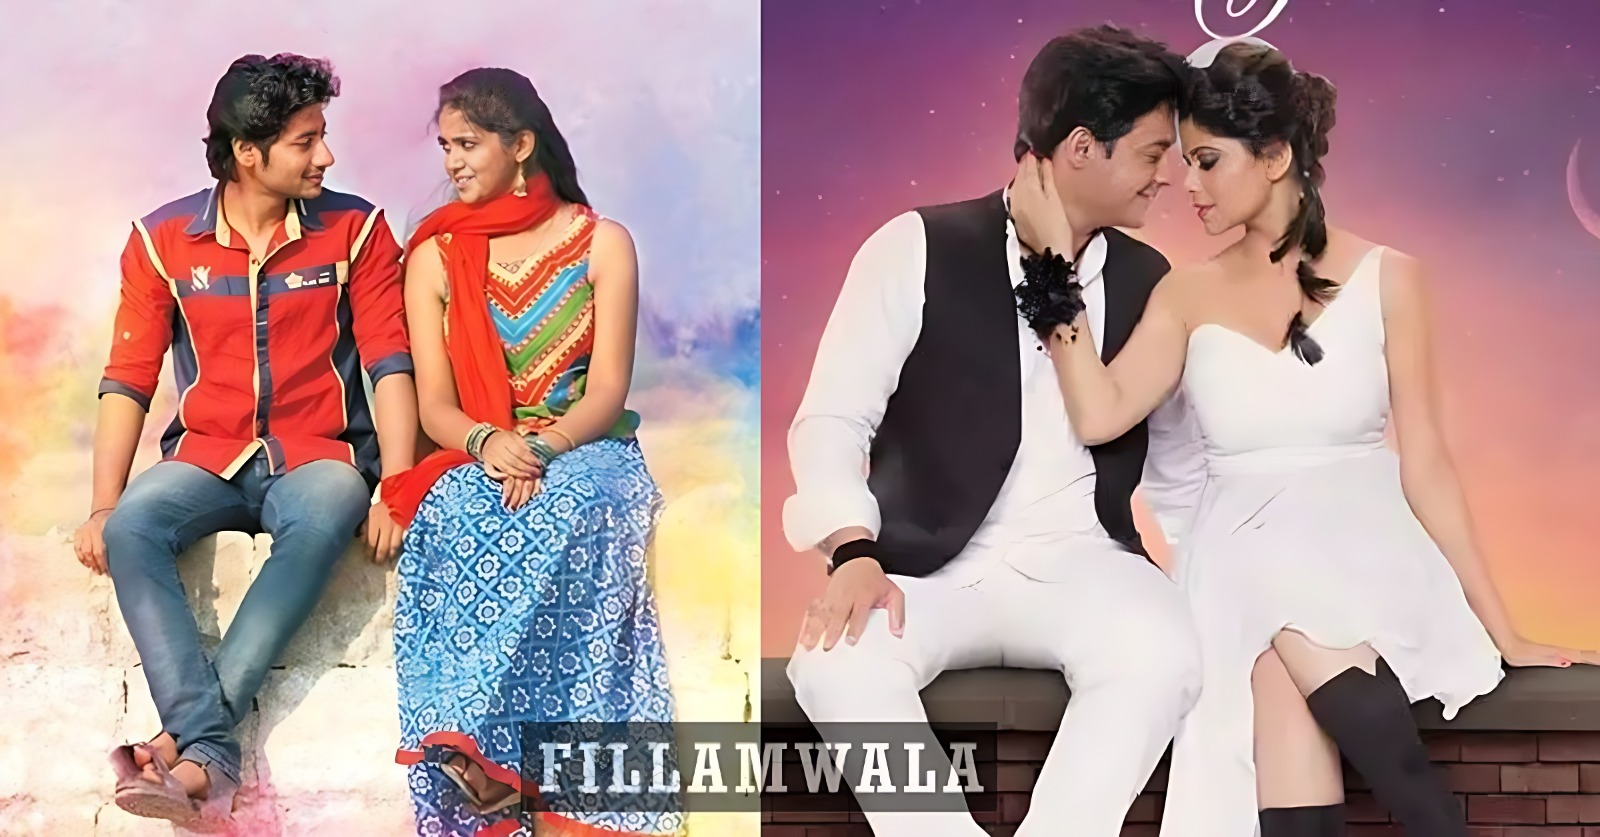 "Celebrate Love this Valentine's Day with Top 5 Romantic Marathi Movies"